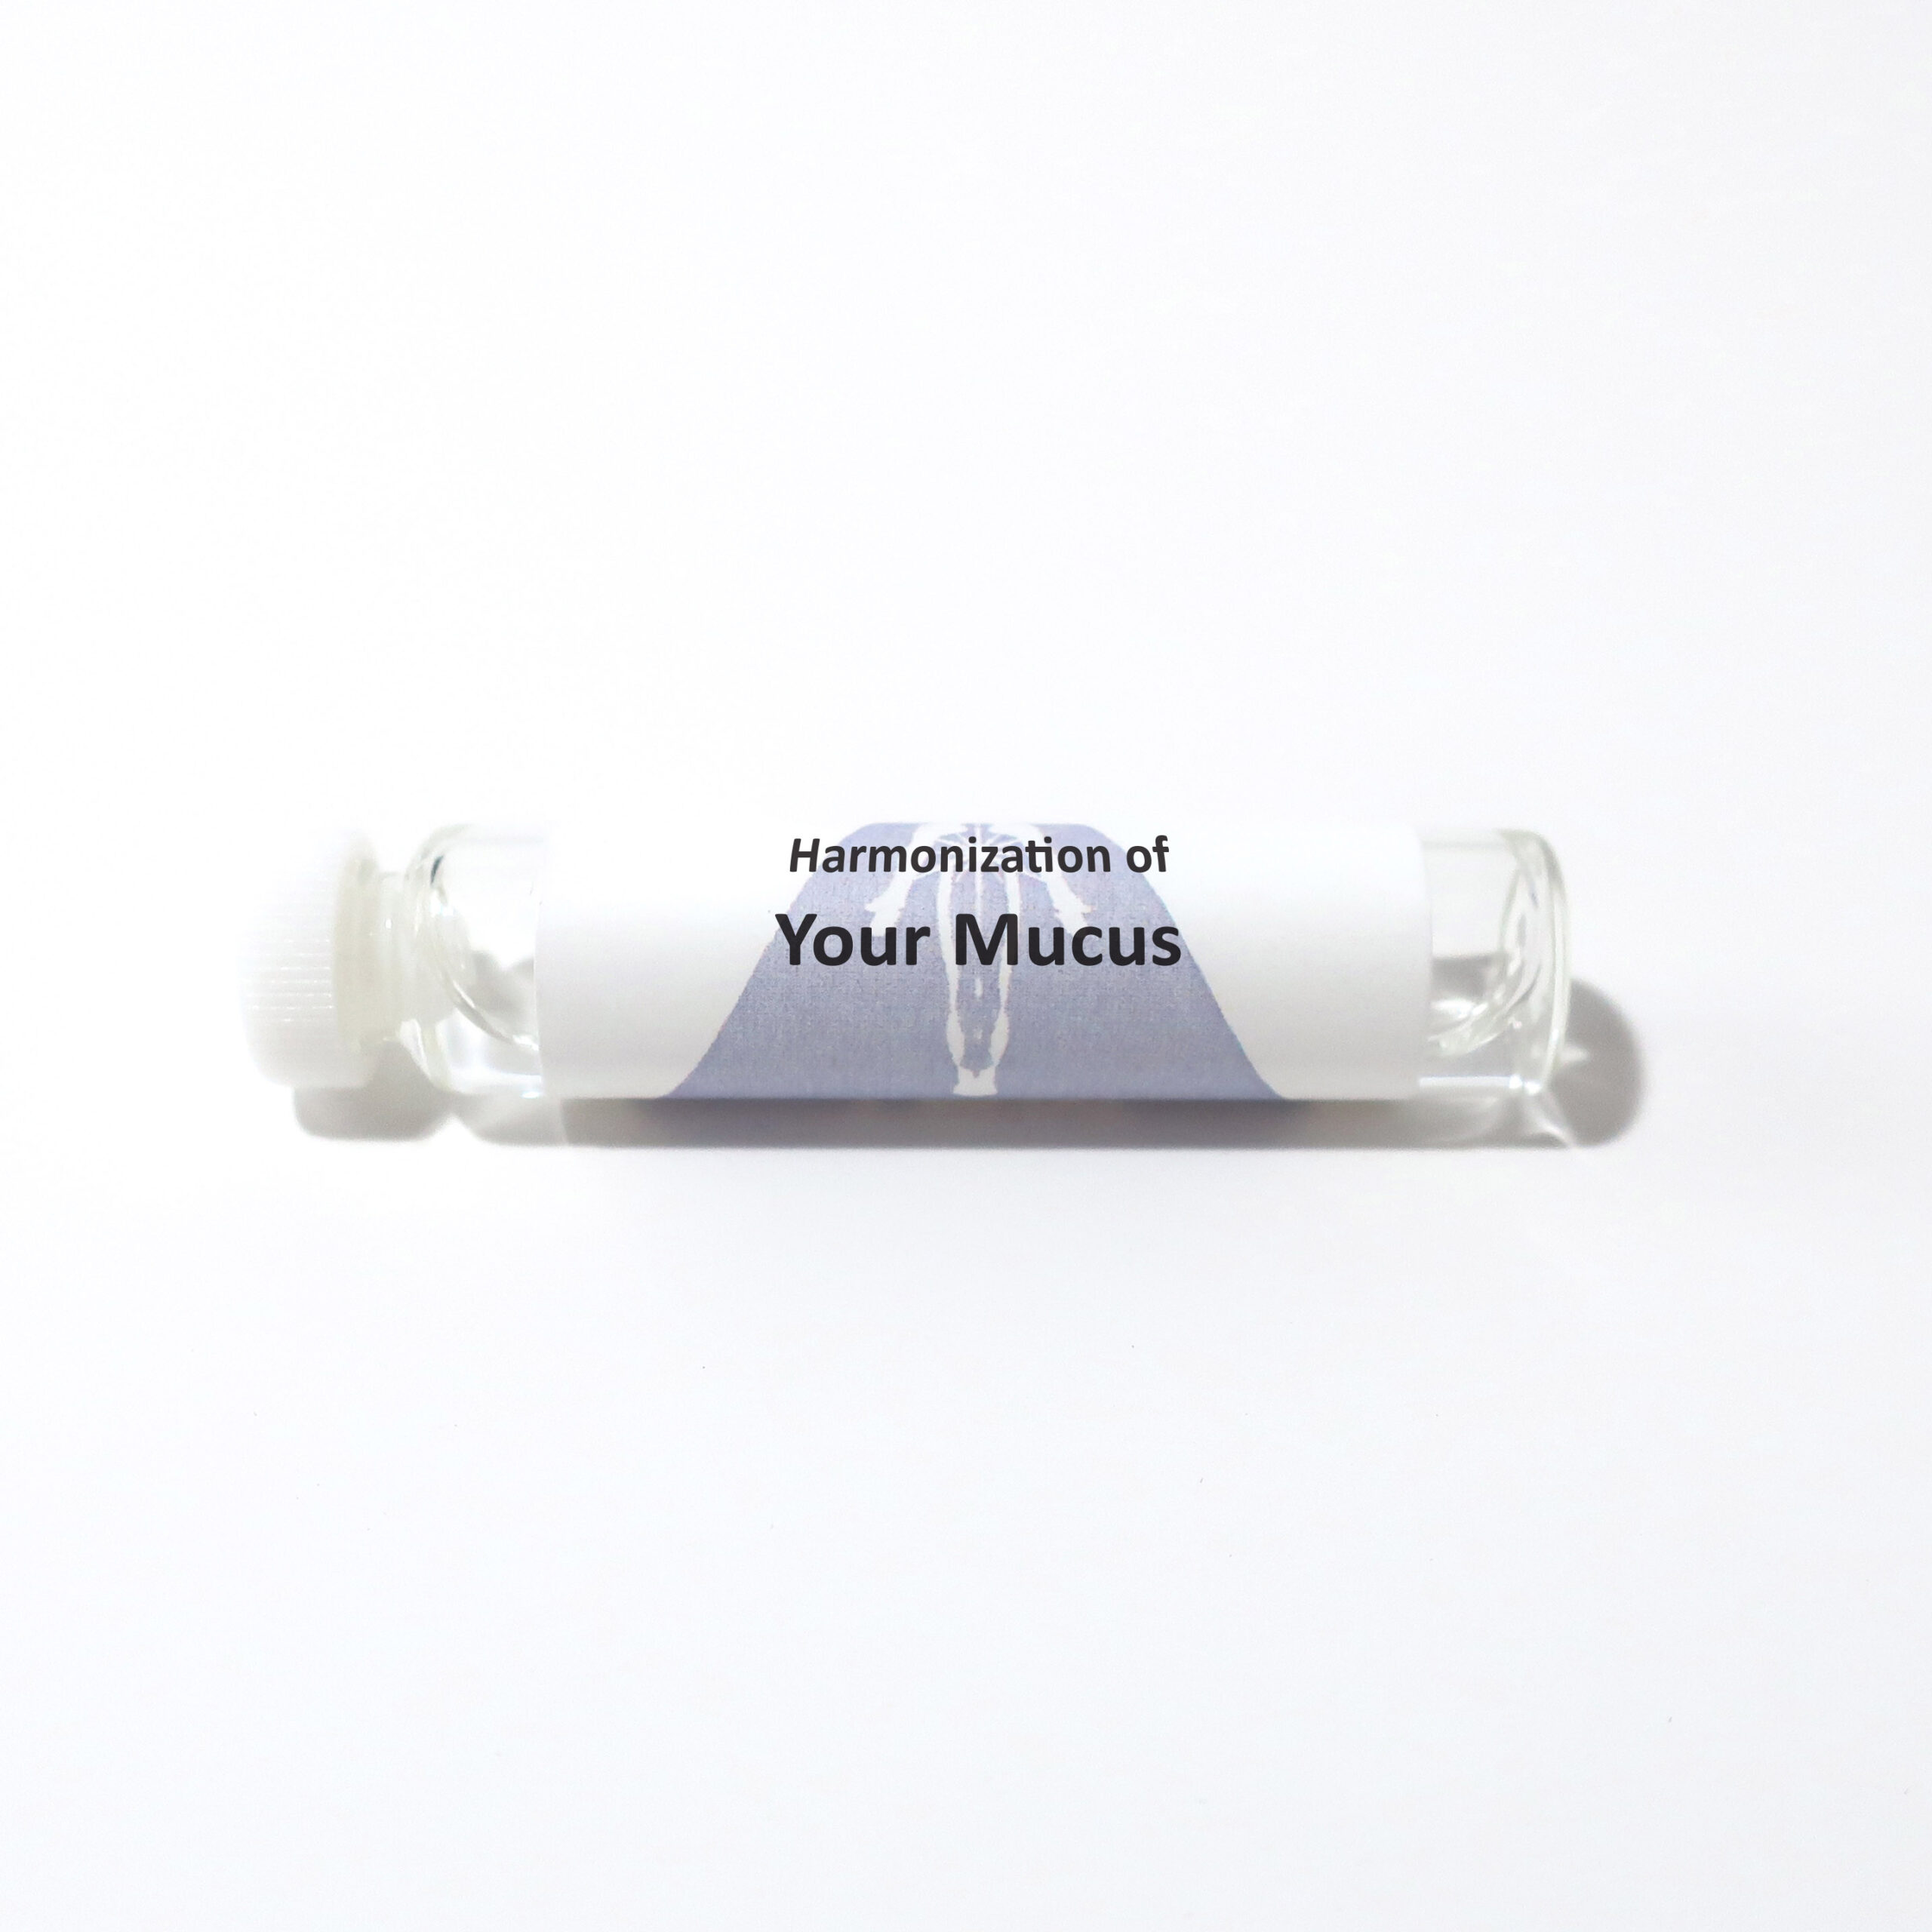 Your Mucus